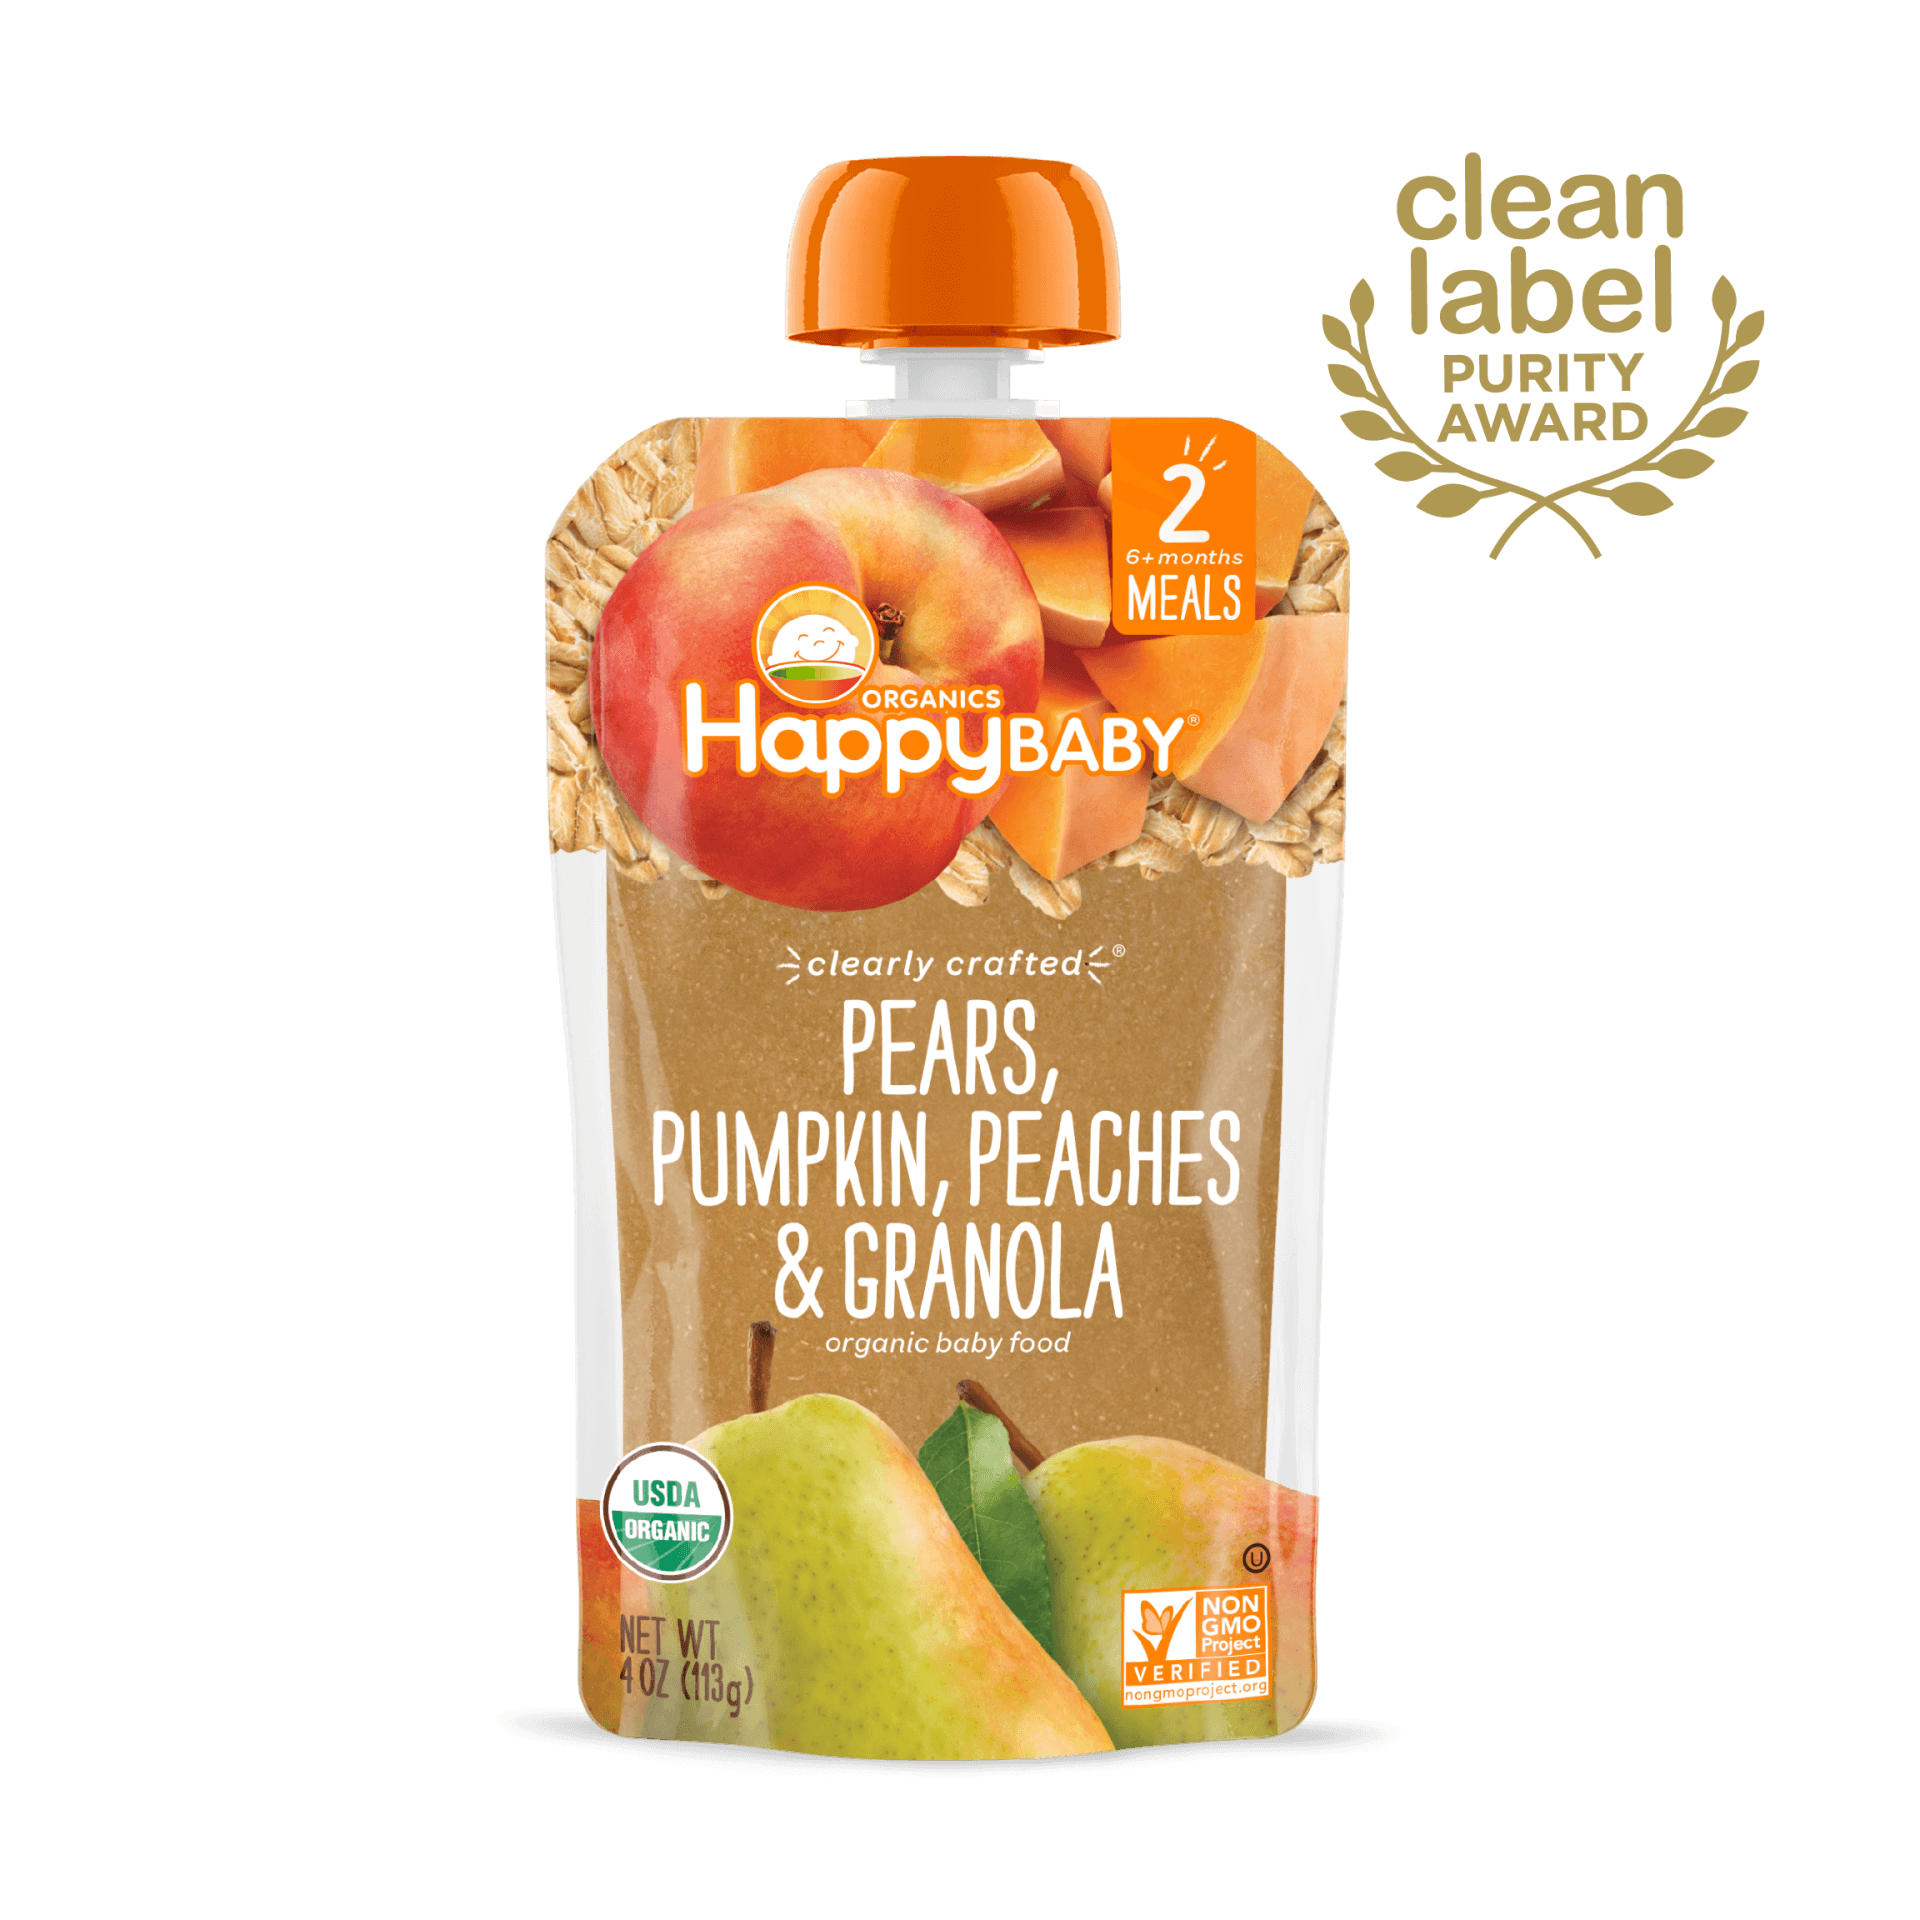 Happy Baby S2 - Clearly Crafted Pears Pumpkin Peaches & Granola 4Oz pouch 16 units per case 4.0 oz